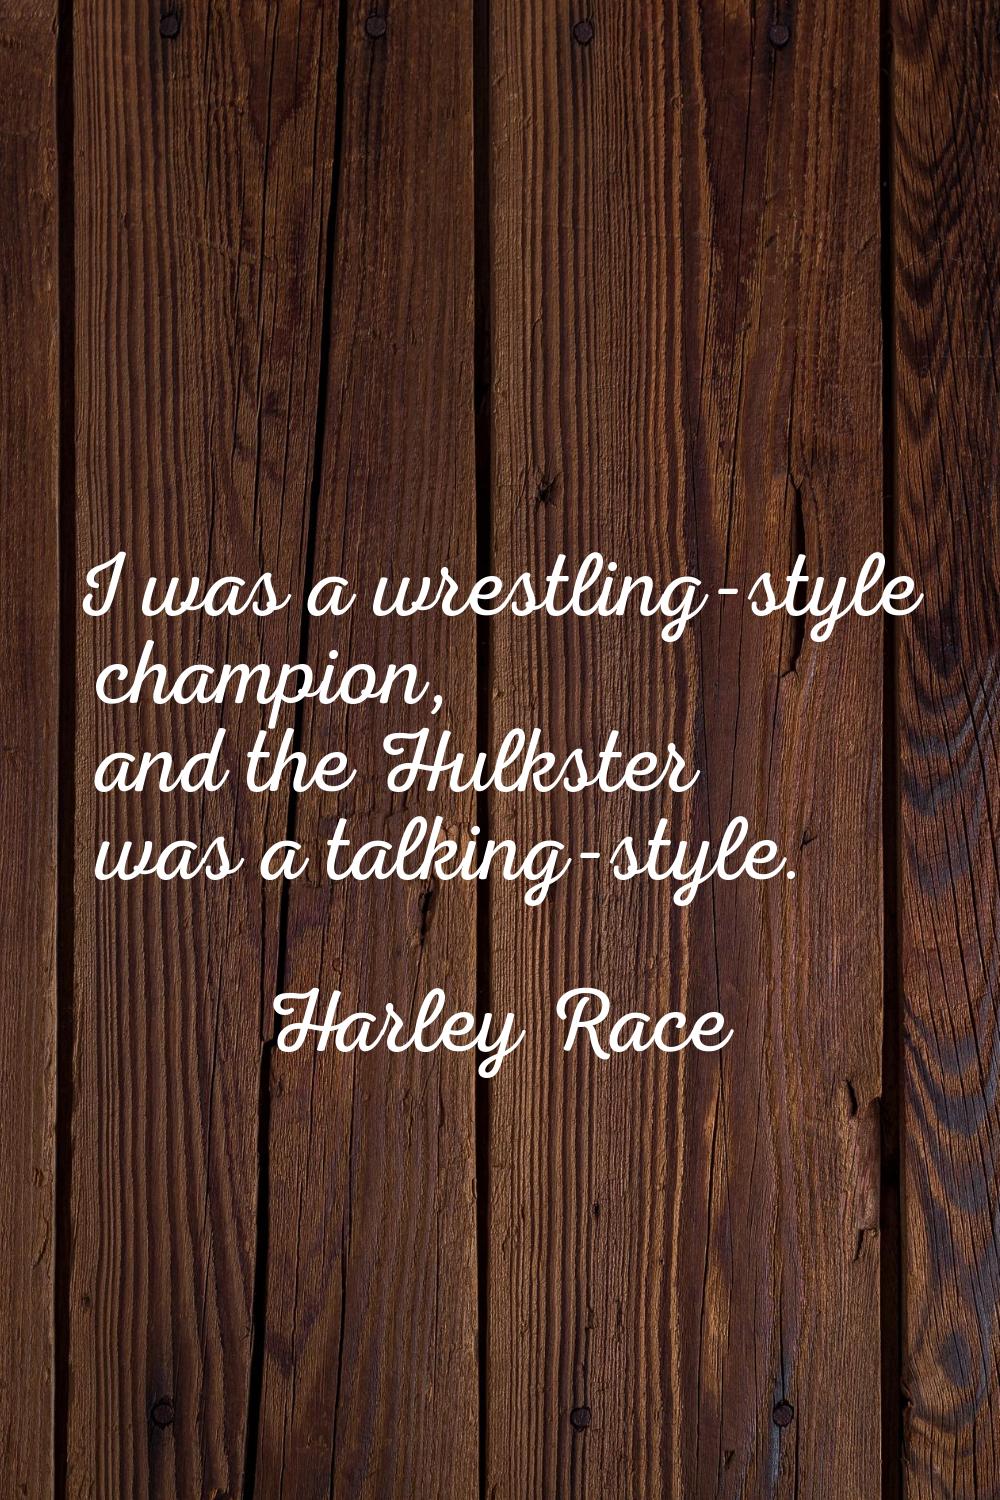 I was a wrestling-style champion, and the Hulkster was a talking-style.